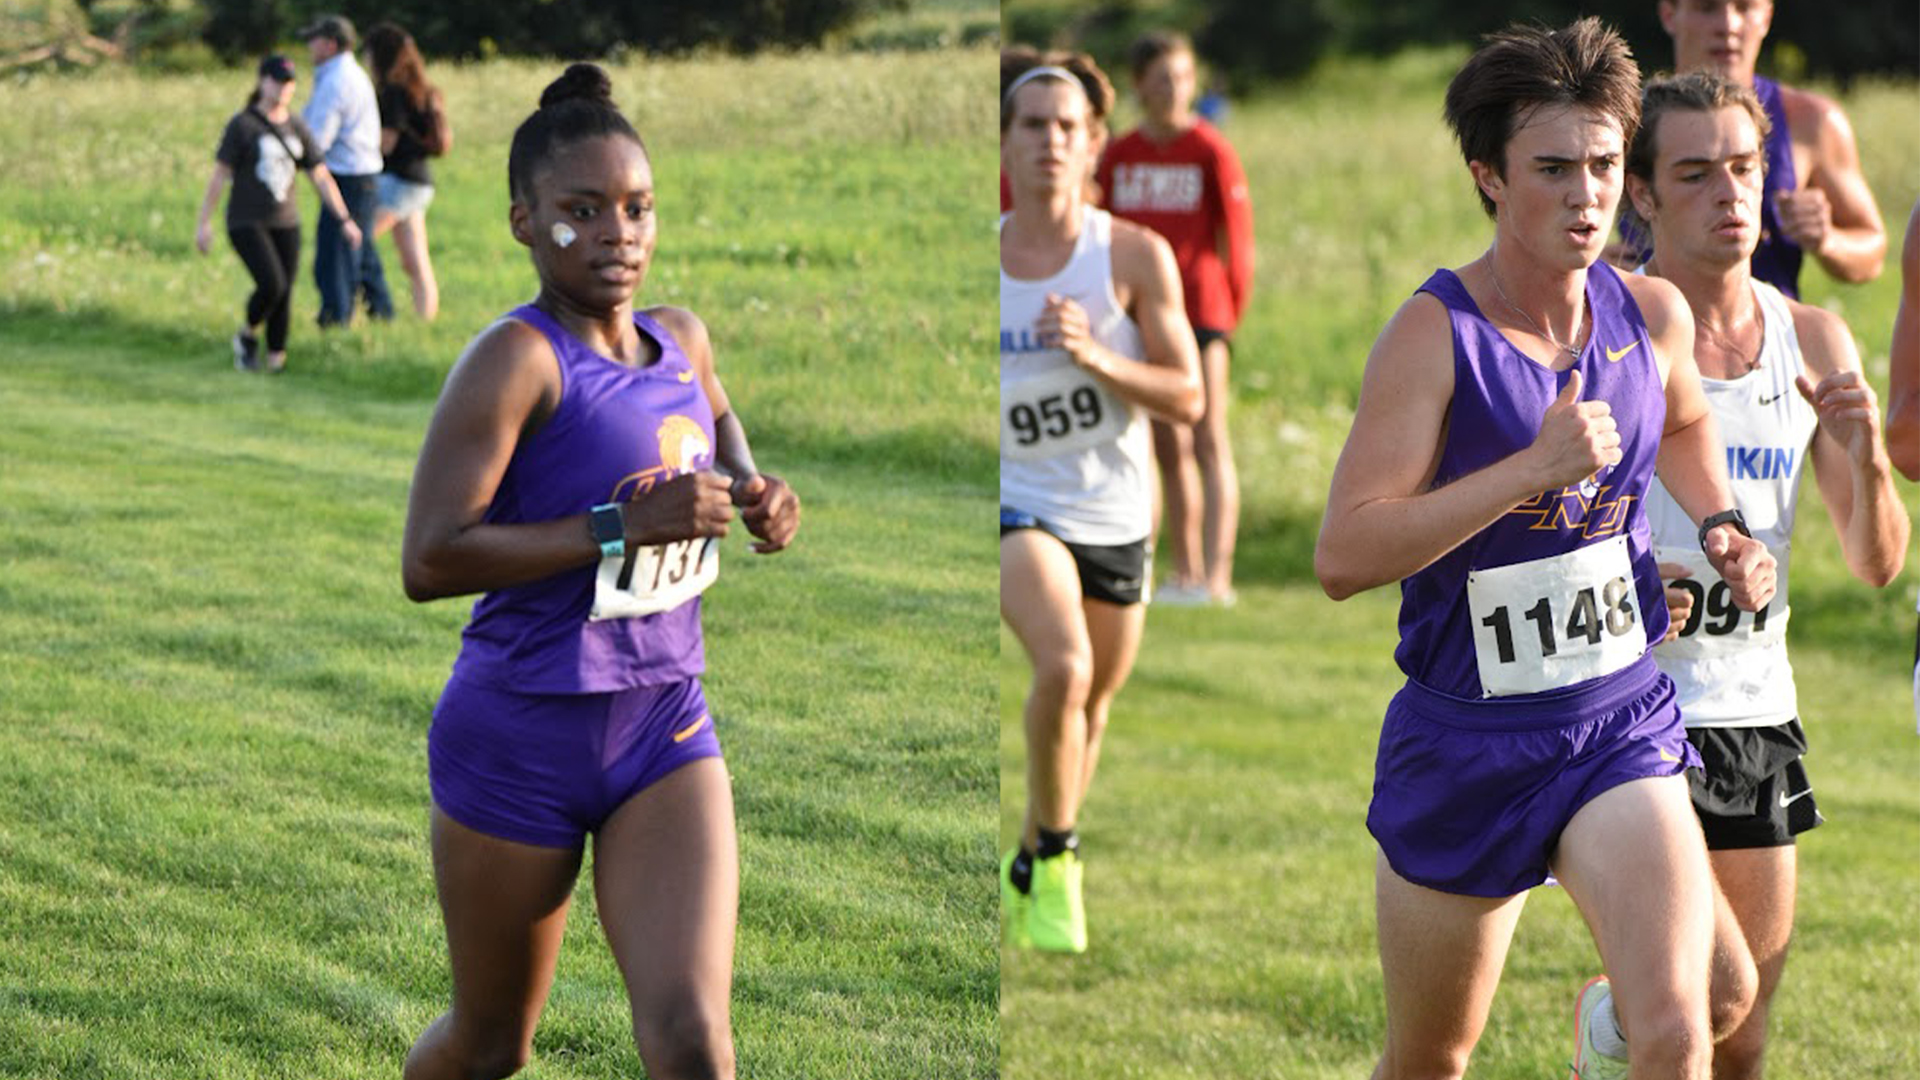 TIGERS RACE AGAINST TOP COMPETITION AT NAIA GREAT LAKES CHALLENGE